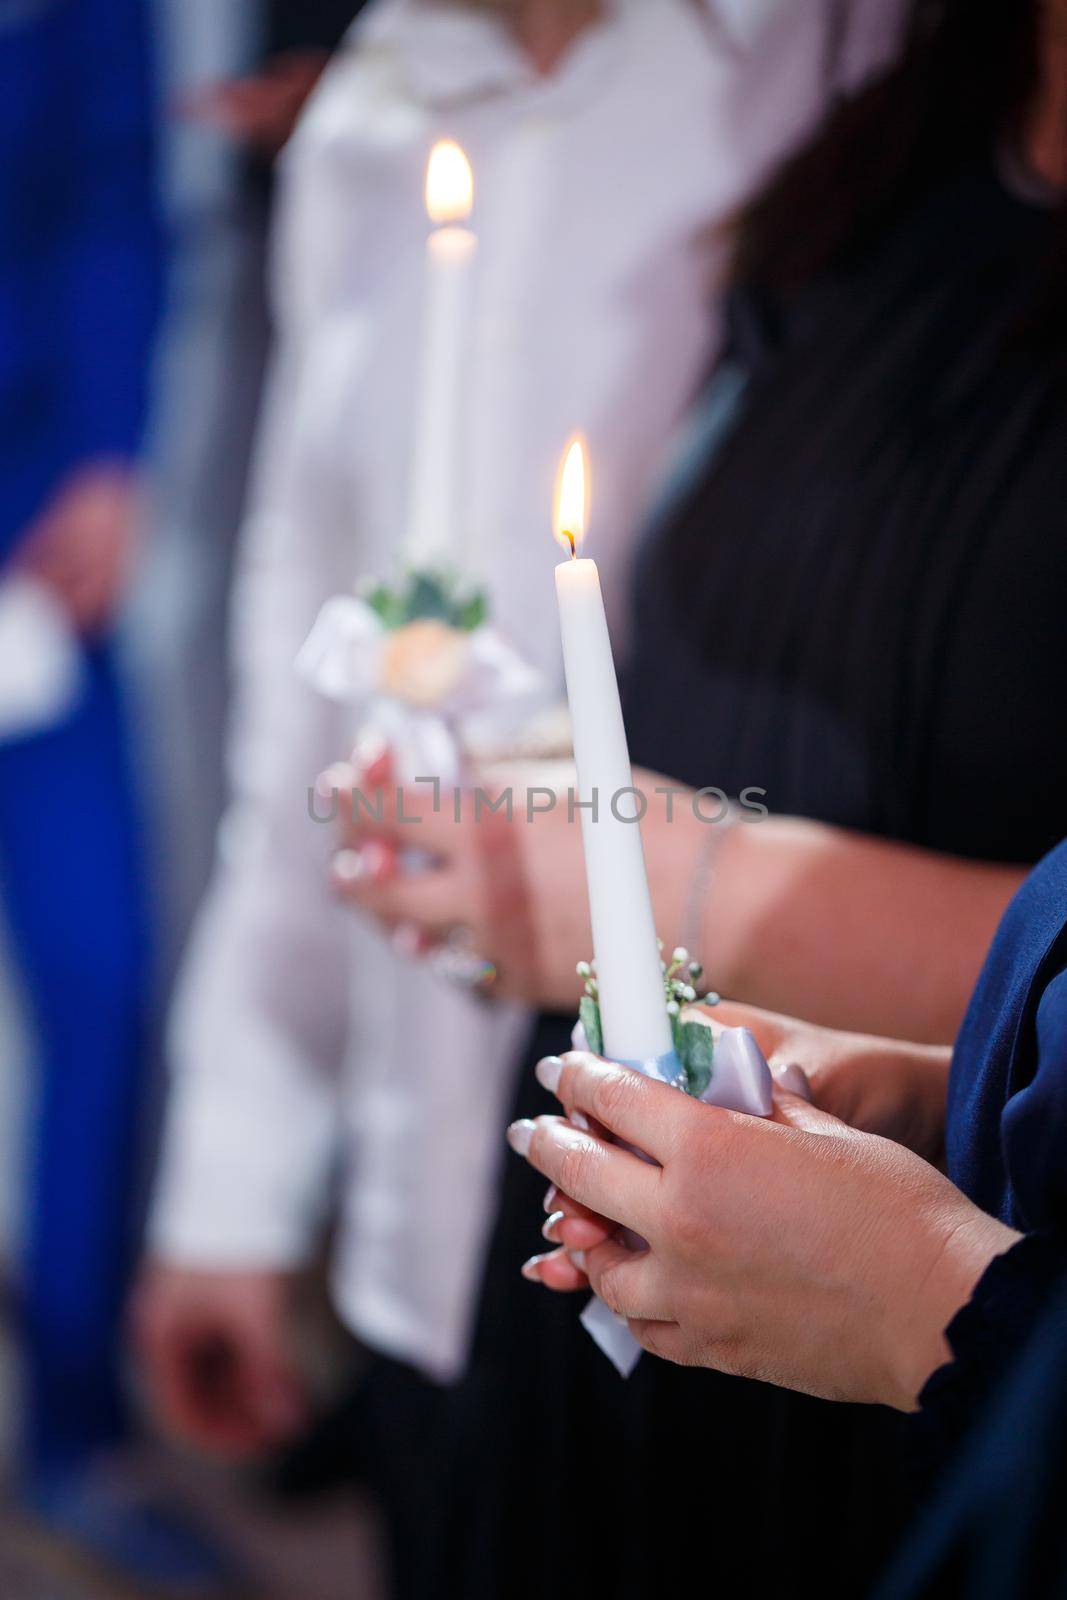 Burning candle in the hands of the newlyweds